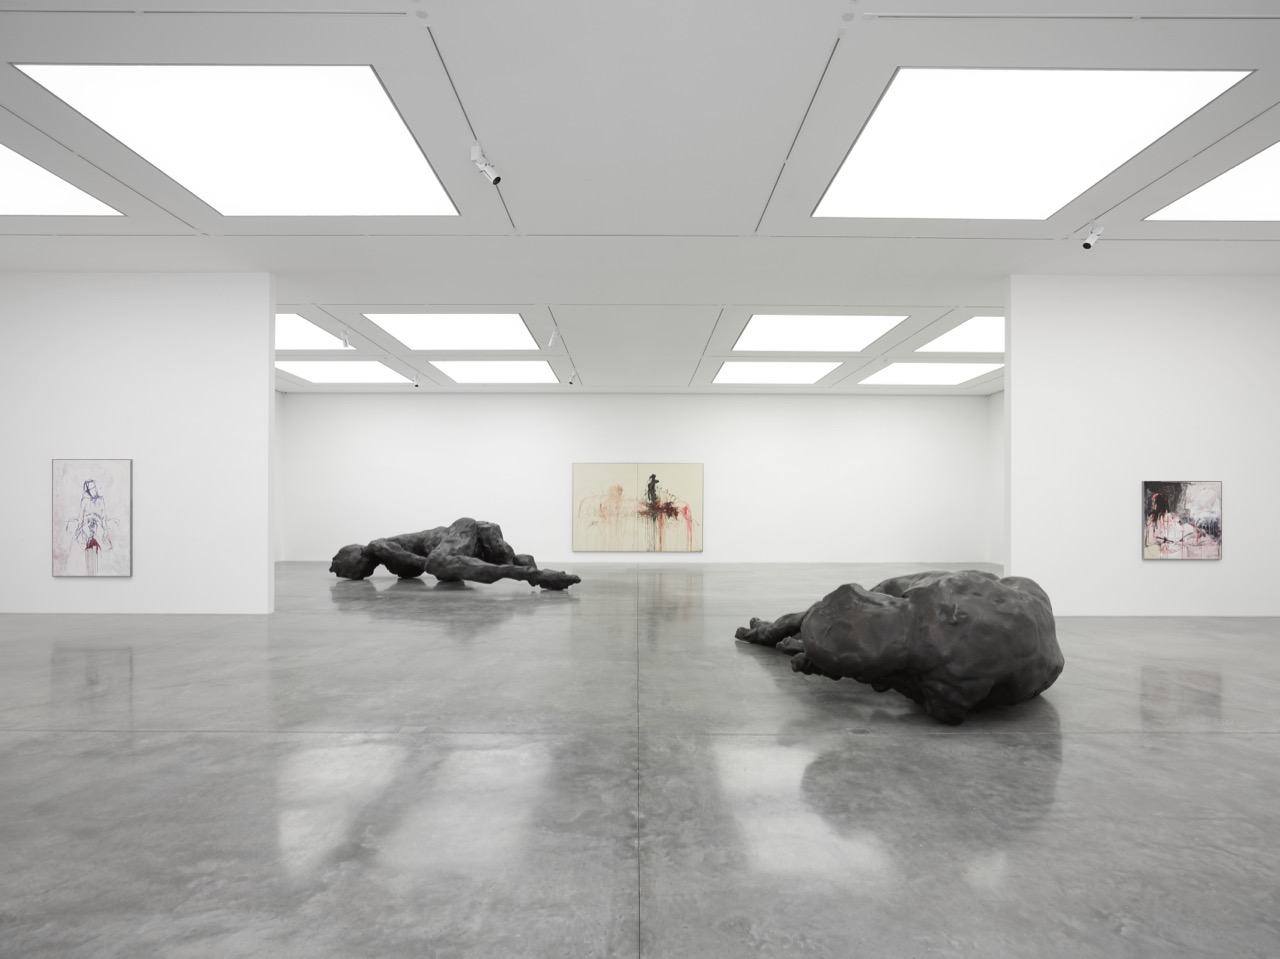 Tracey Emin, White Cube, art, gallery, museum, a fortnight of tears, british, london